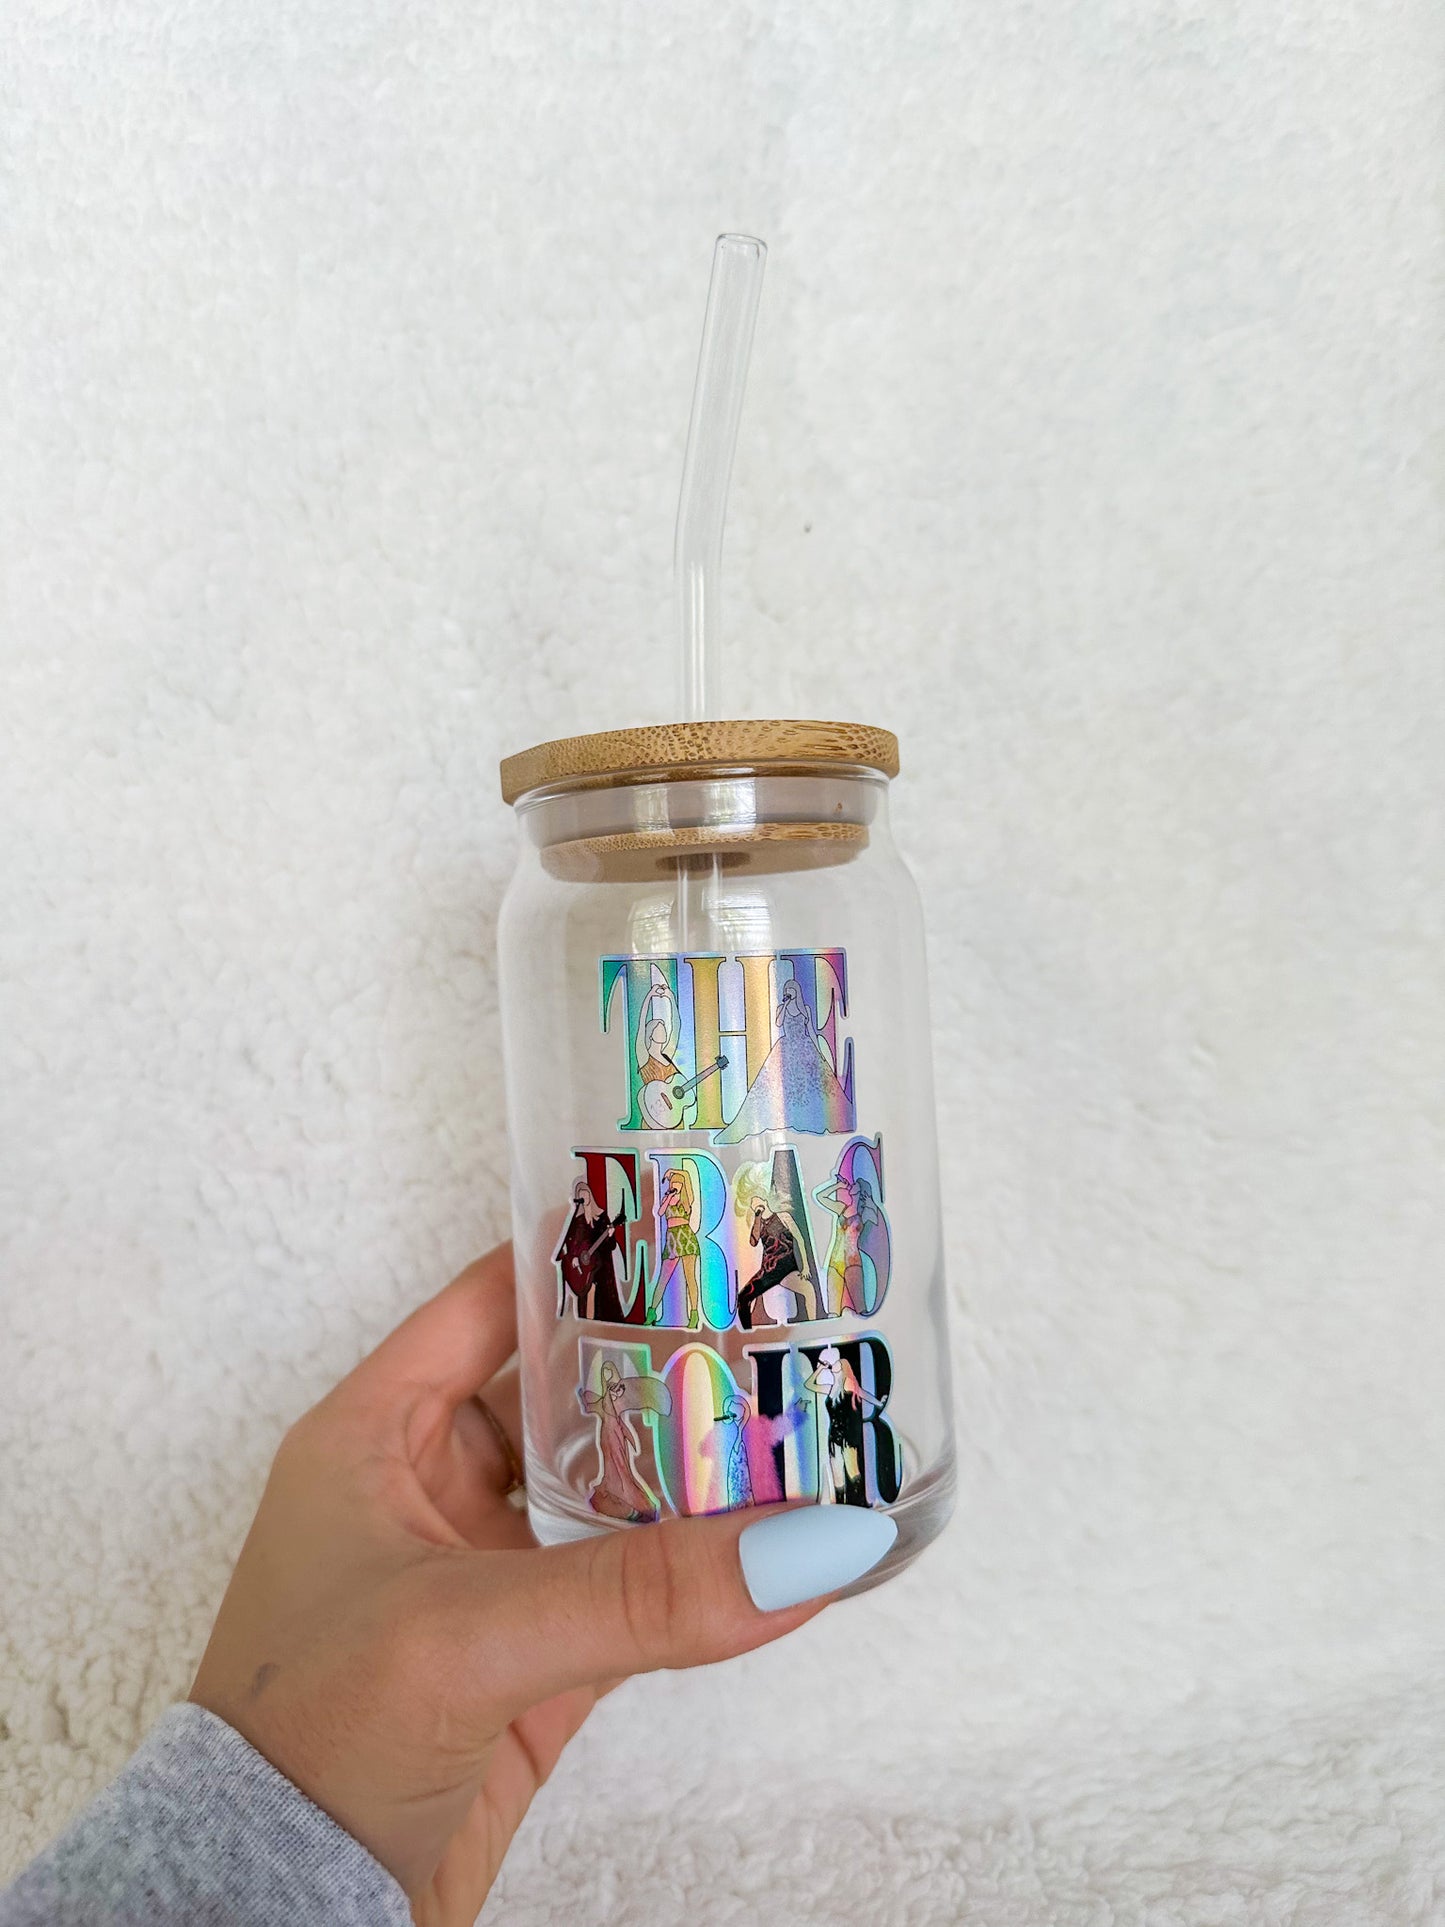 T-Swift the eras tour holographic glass cup.